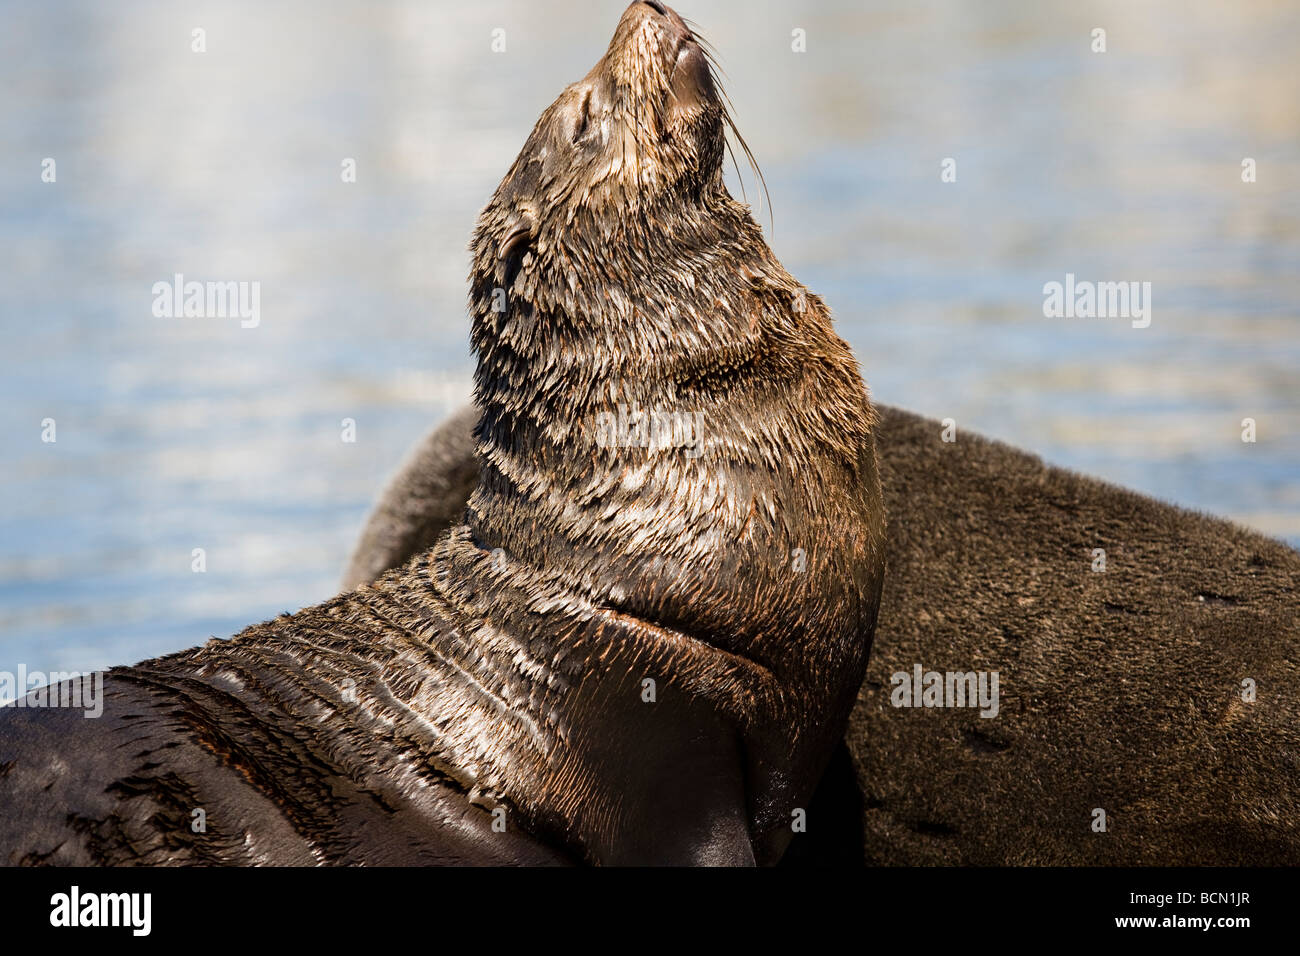 Cape fur seals in the heart of Cape Town's working harbour, the Victoria & Alfred Waterfront, South Africa Stock Photo